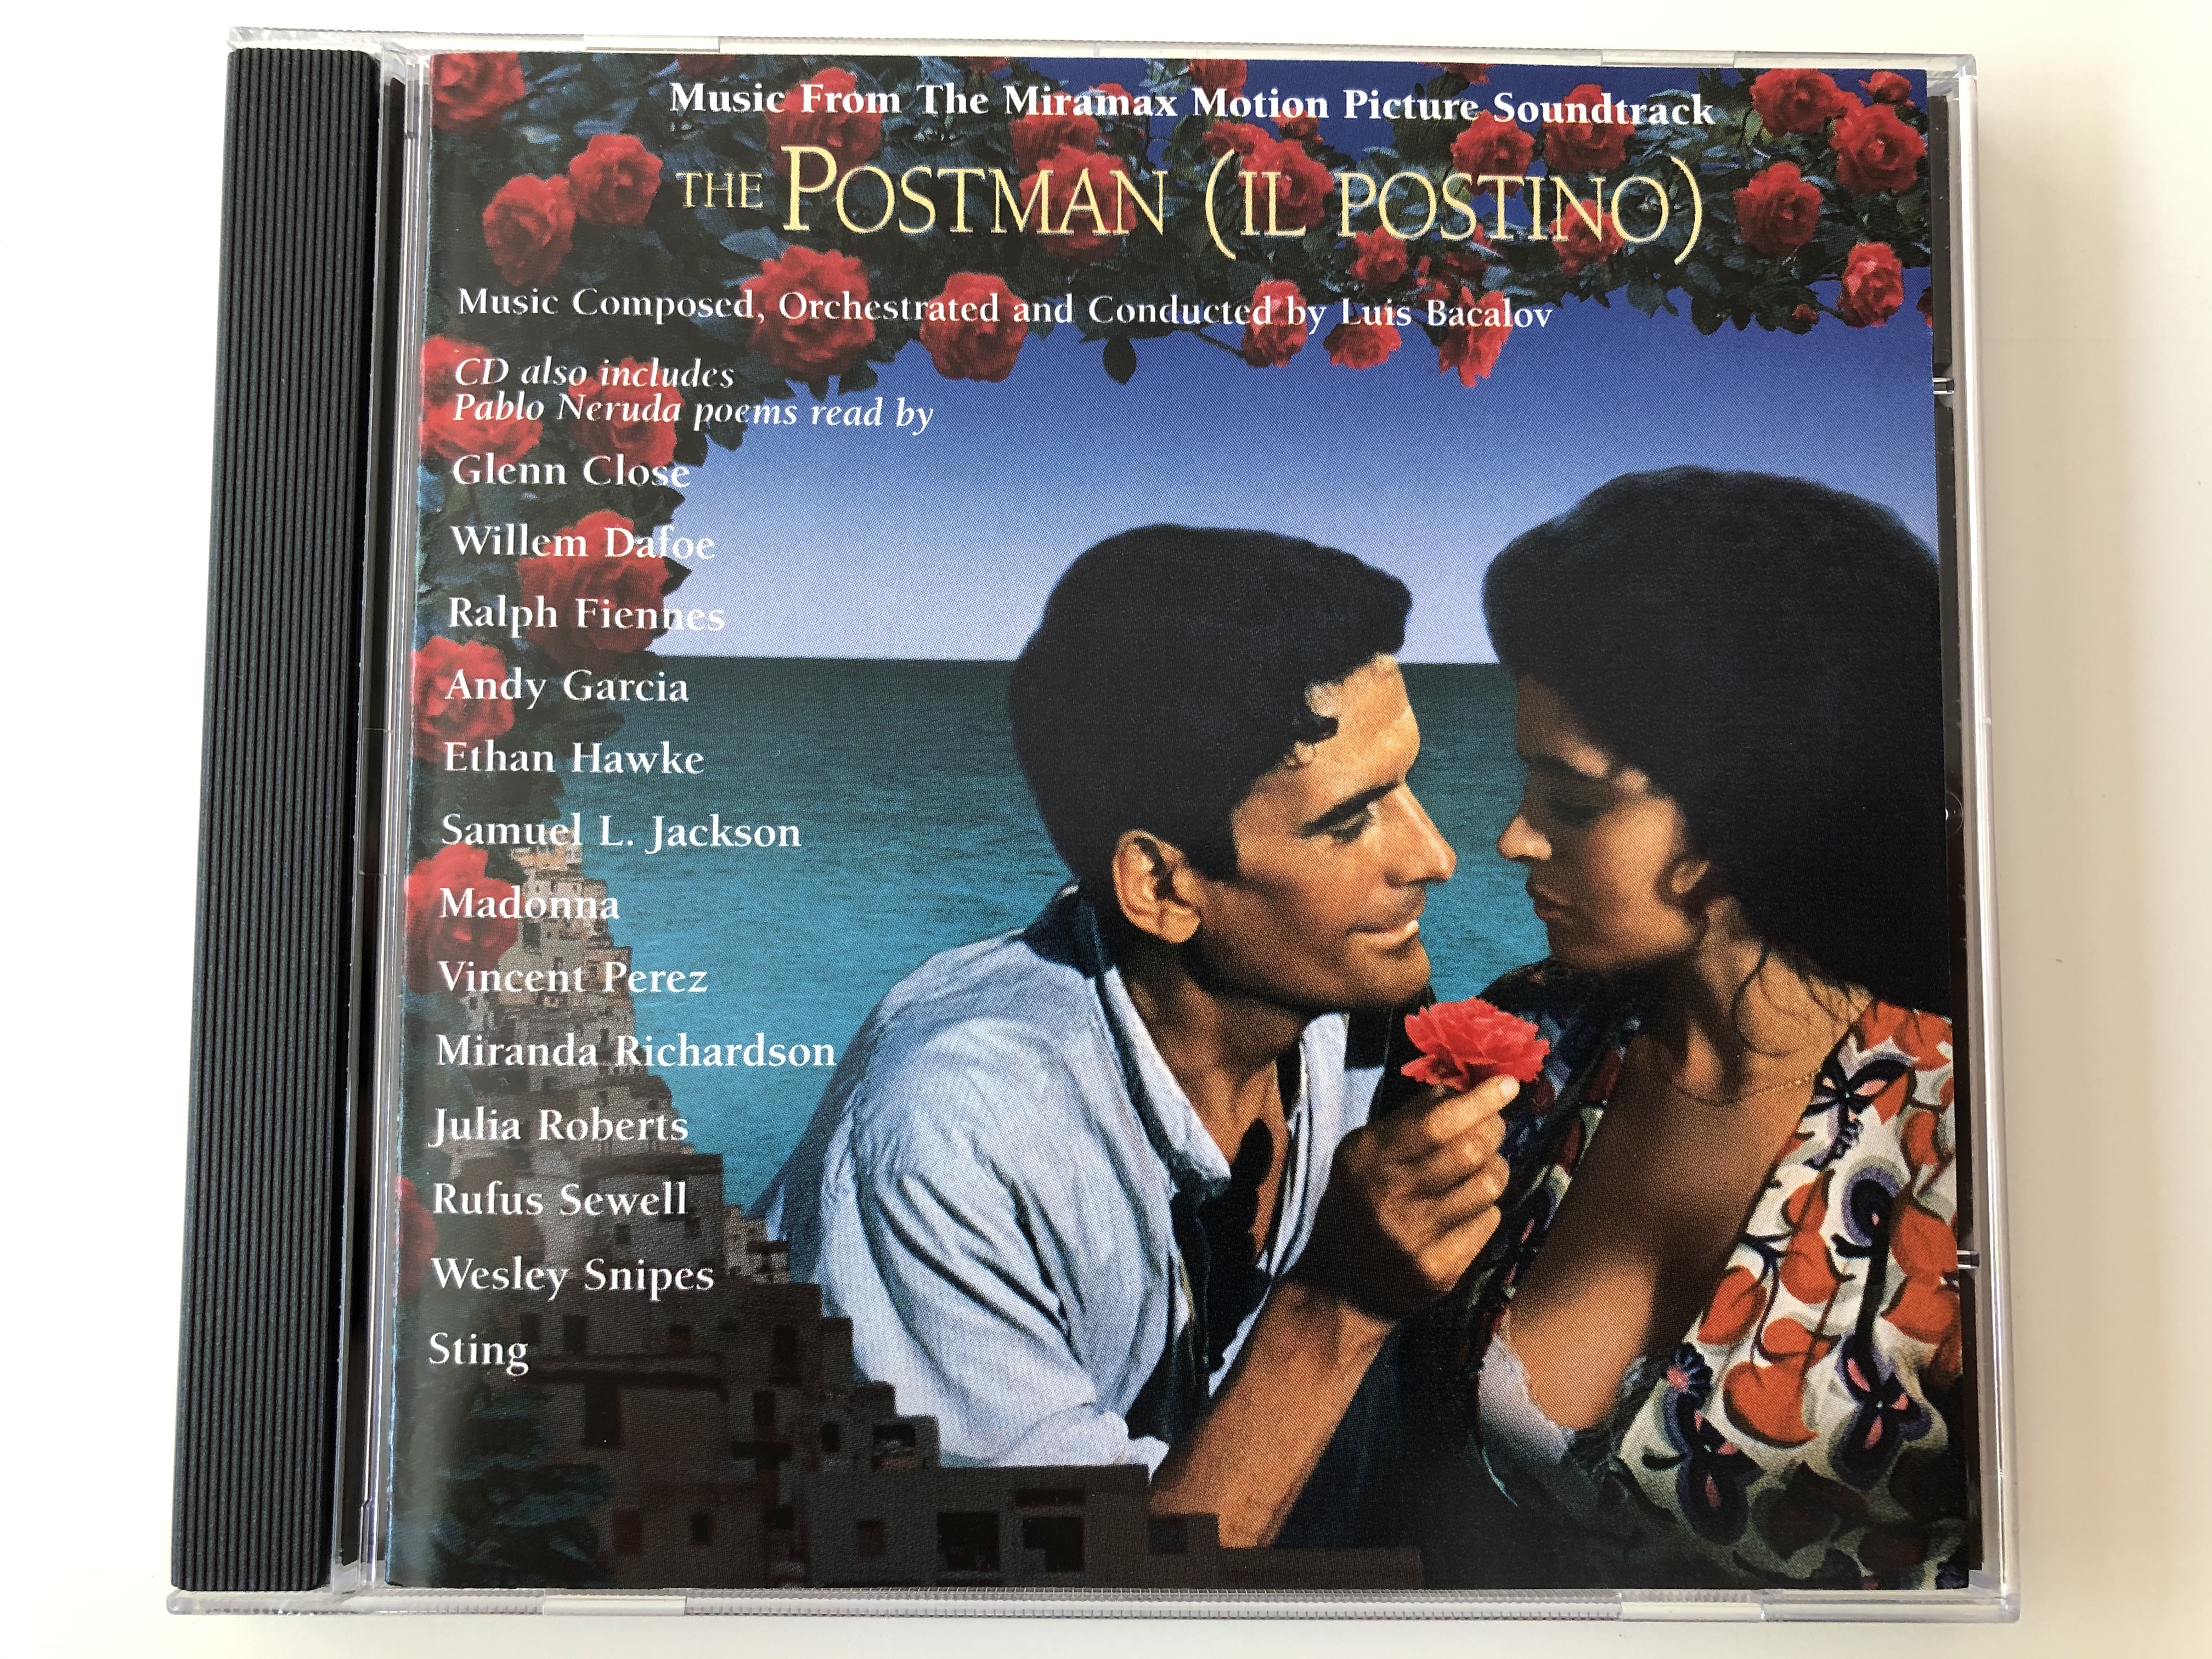 music-from-the-miramax-motion-picture-soundtrack-the-postman-il-postino-music-composed-orchestrated-and-conducted-by-luis-bacalov-cd-also-includes-pablo-neruda-poems-edel-audio-cd-1995-0-1-.jpg